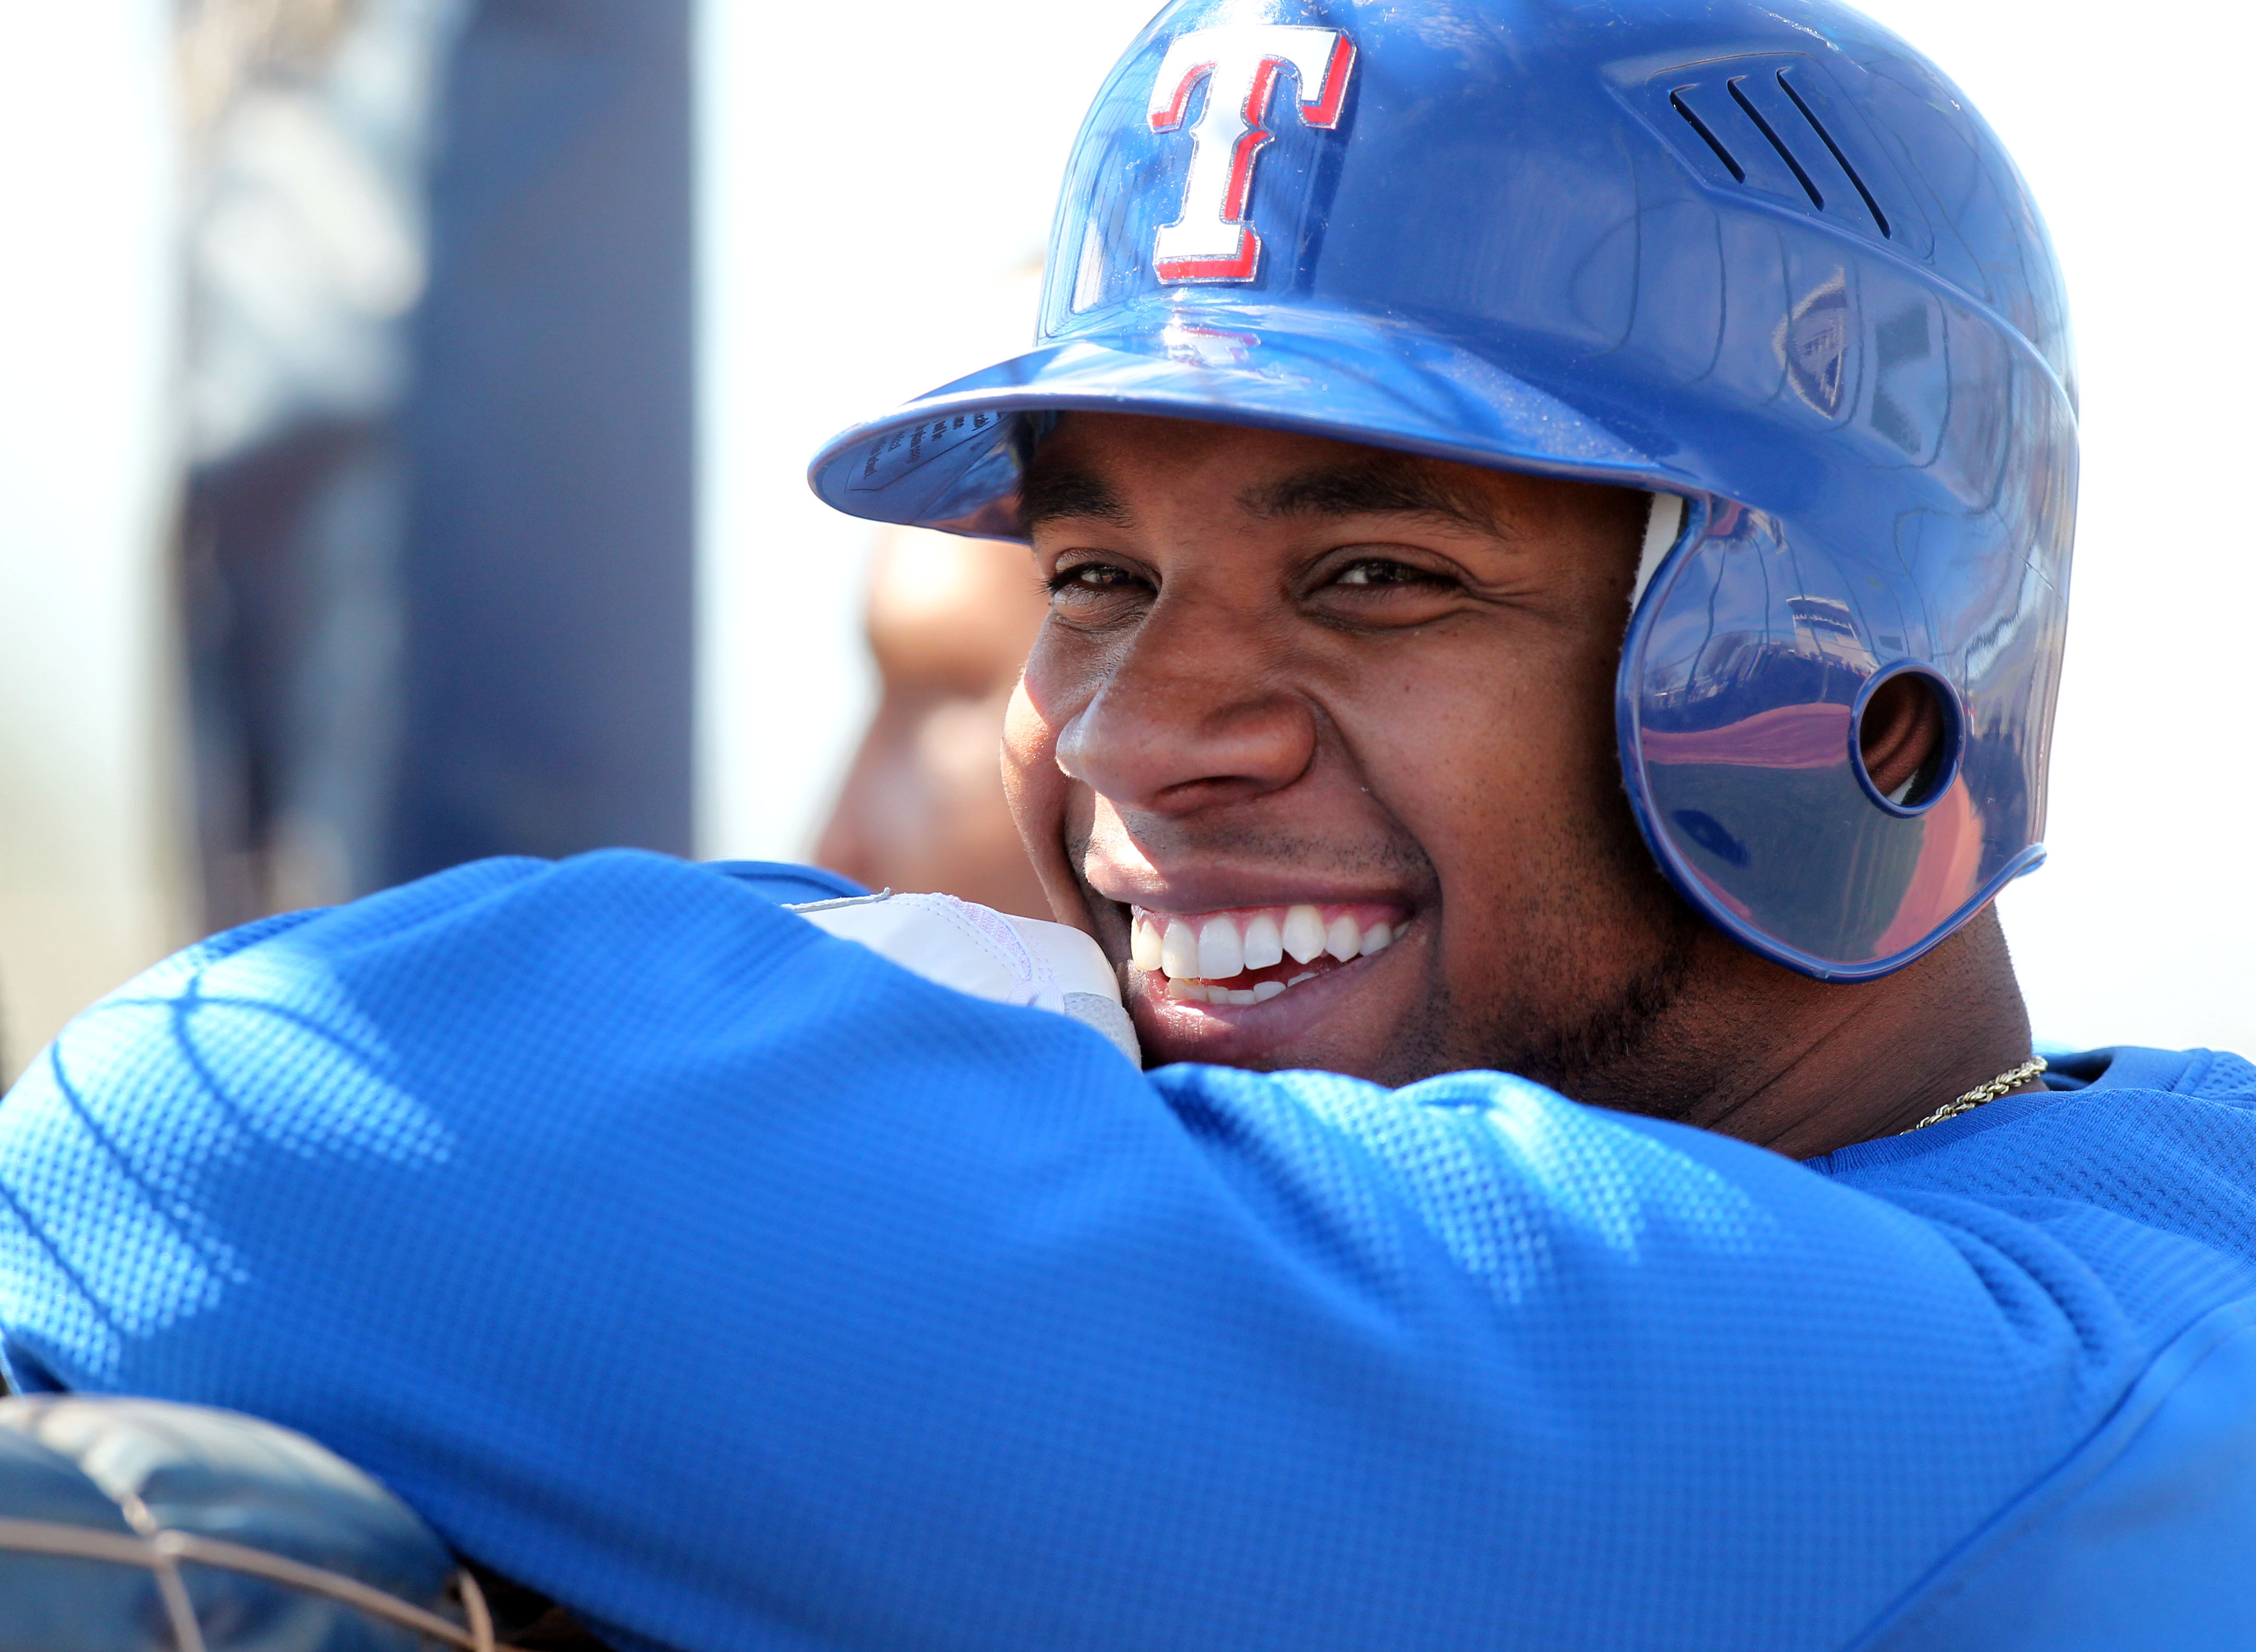 TIL Elvis Andrus' older brother signed a minor league deal with the  Rangers. : r/TexasRangers